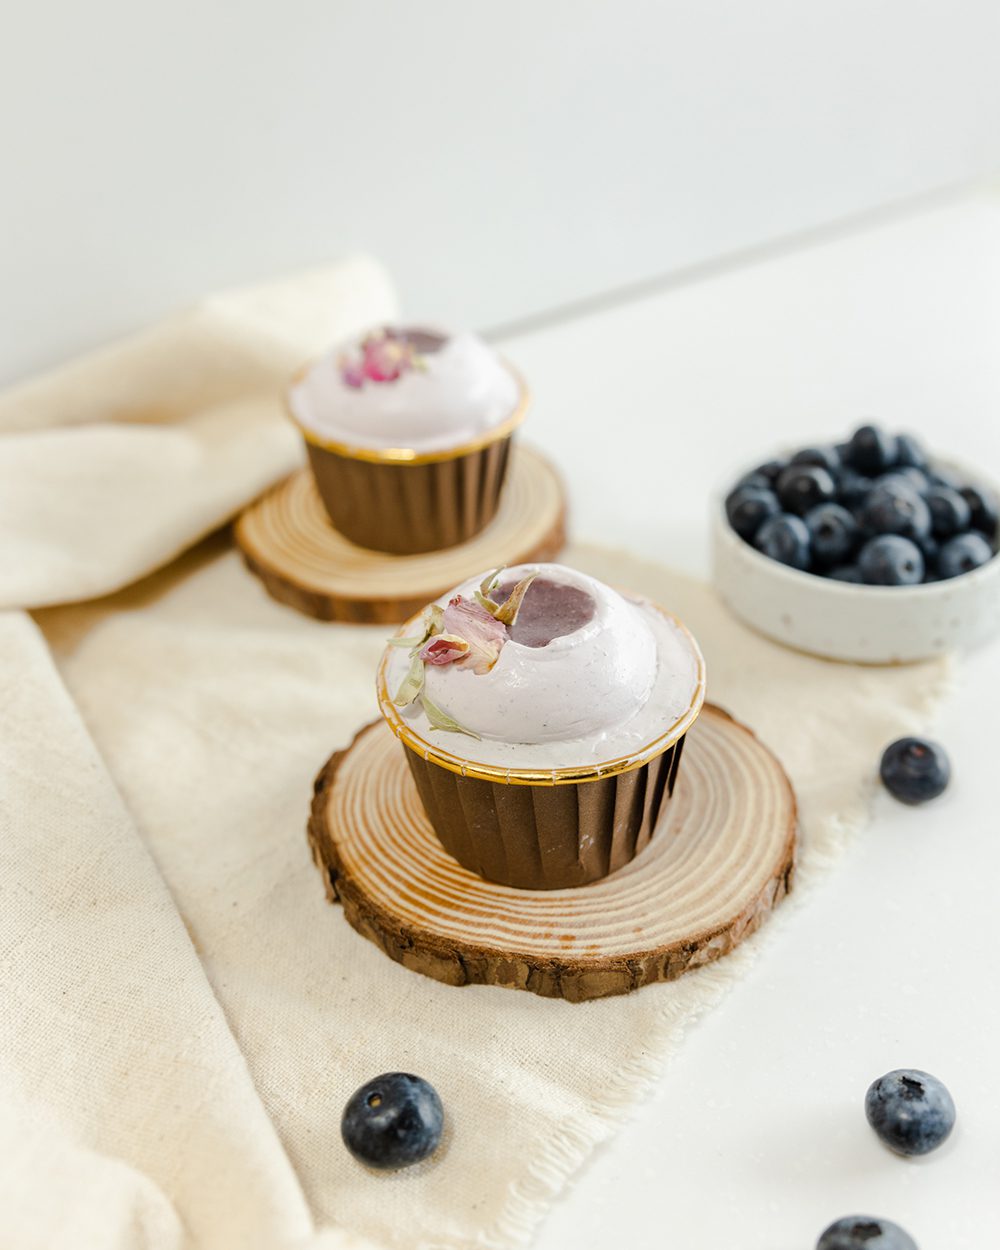 Blueberry Cupcakes (eggless, dairy-free, baby-friendly, diabetic friendly, nut-free)